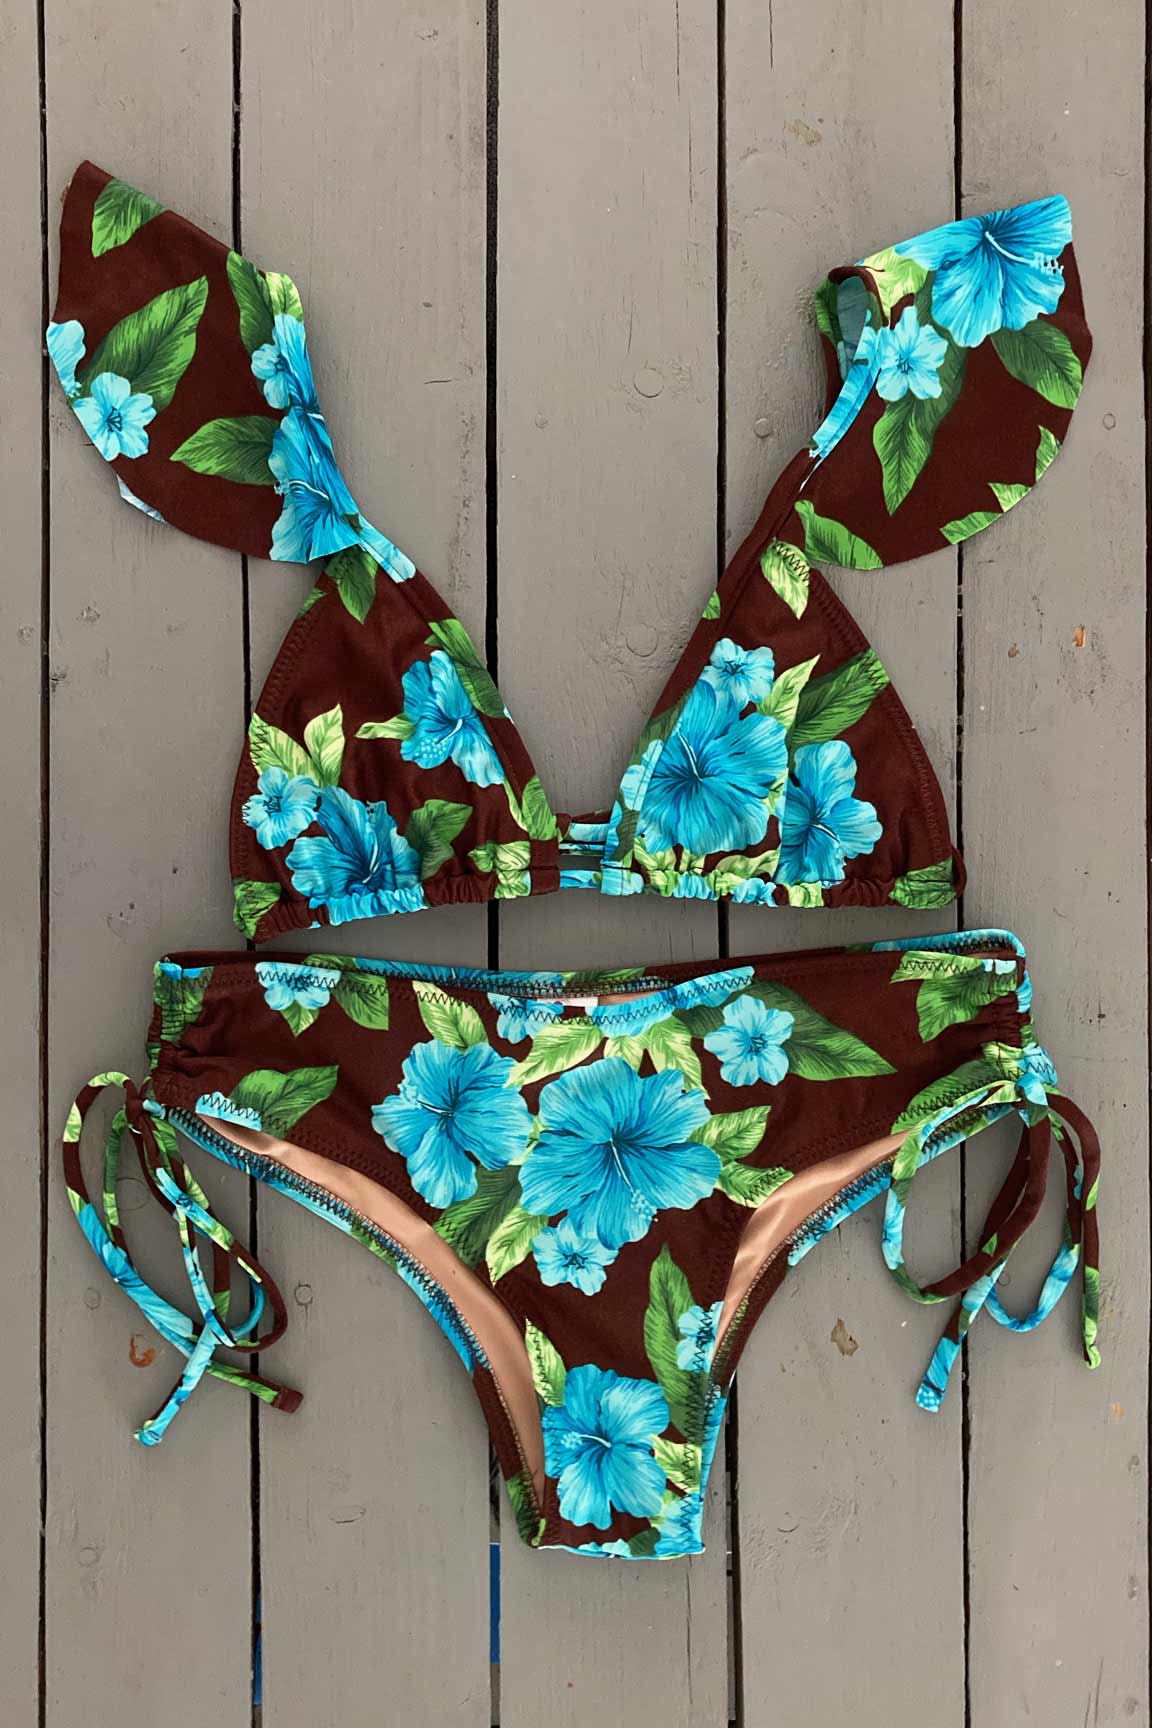 Get that tropical feeling in this triangle bikini top with ruffle accent. illes Bikinis swimwear lets women feel sexy, confident, glamorous, and comfortable all at the same time. They are made with the finest quality of soft and stretchy Lycra to achieve the best fit. Find yours @JillesBikinis